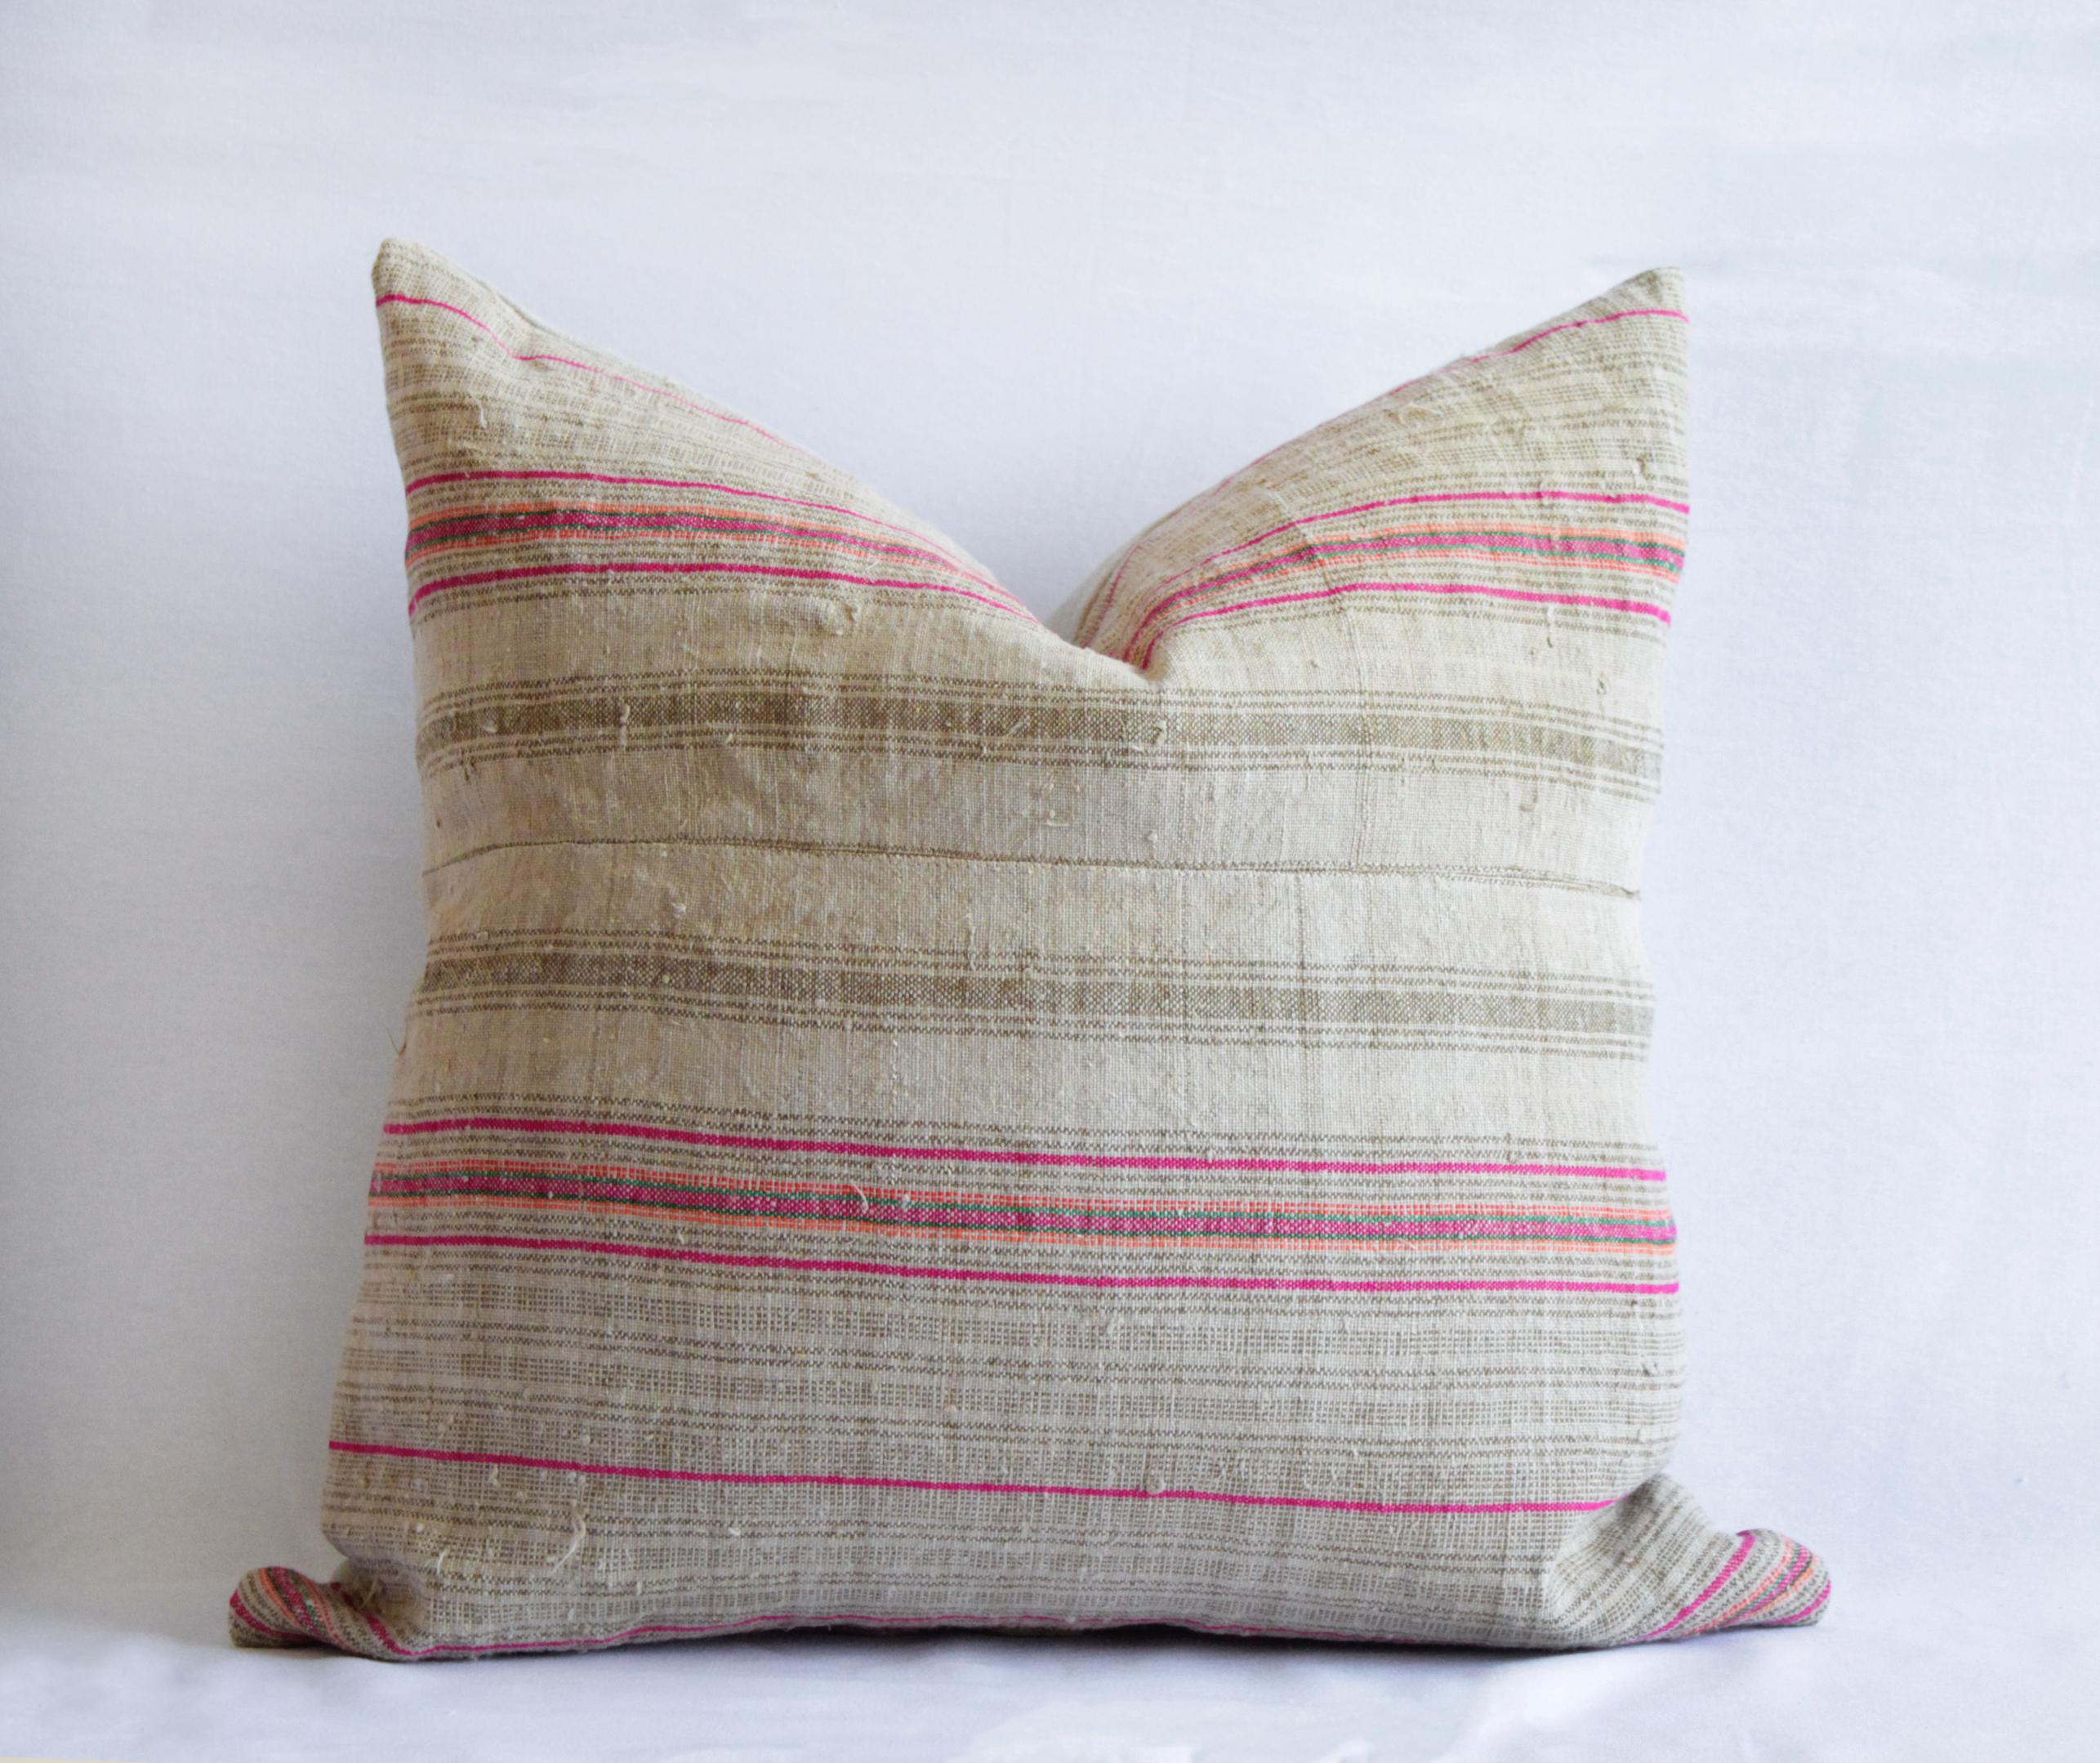 North American Antique Grainsack Linen Stripe Pillows in Natural Tones with Pink Stripes